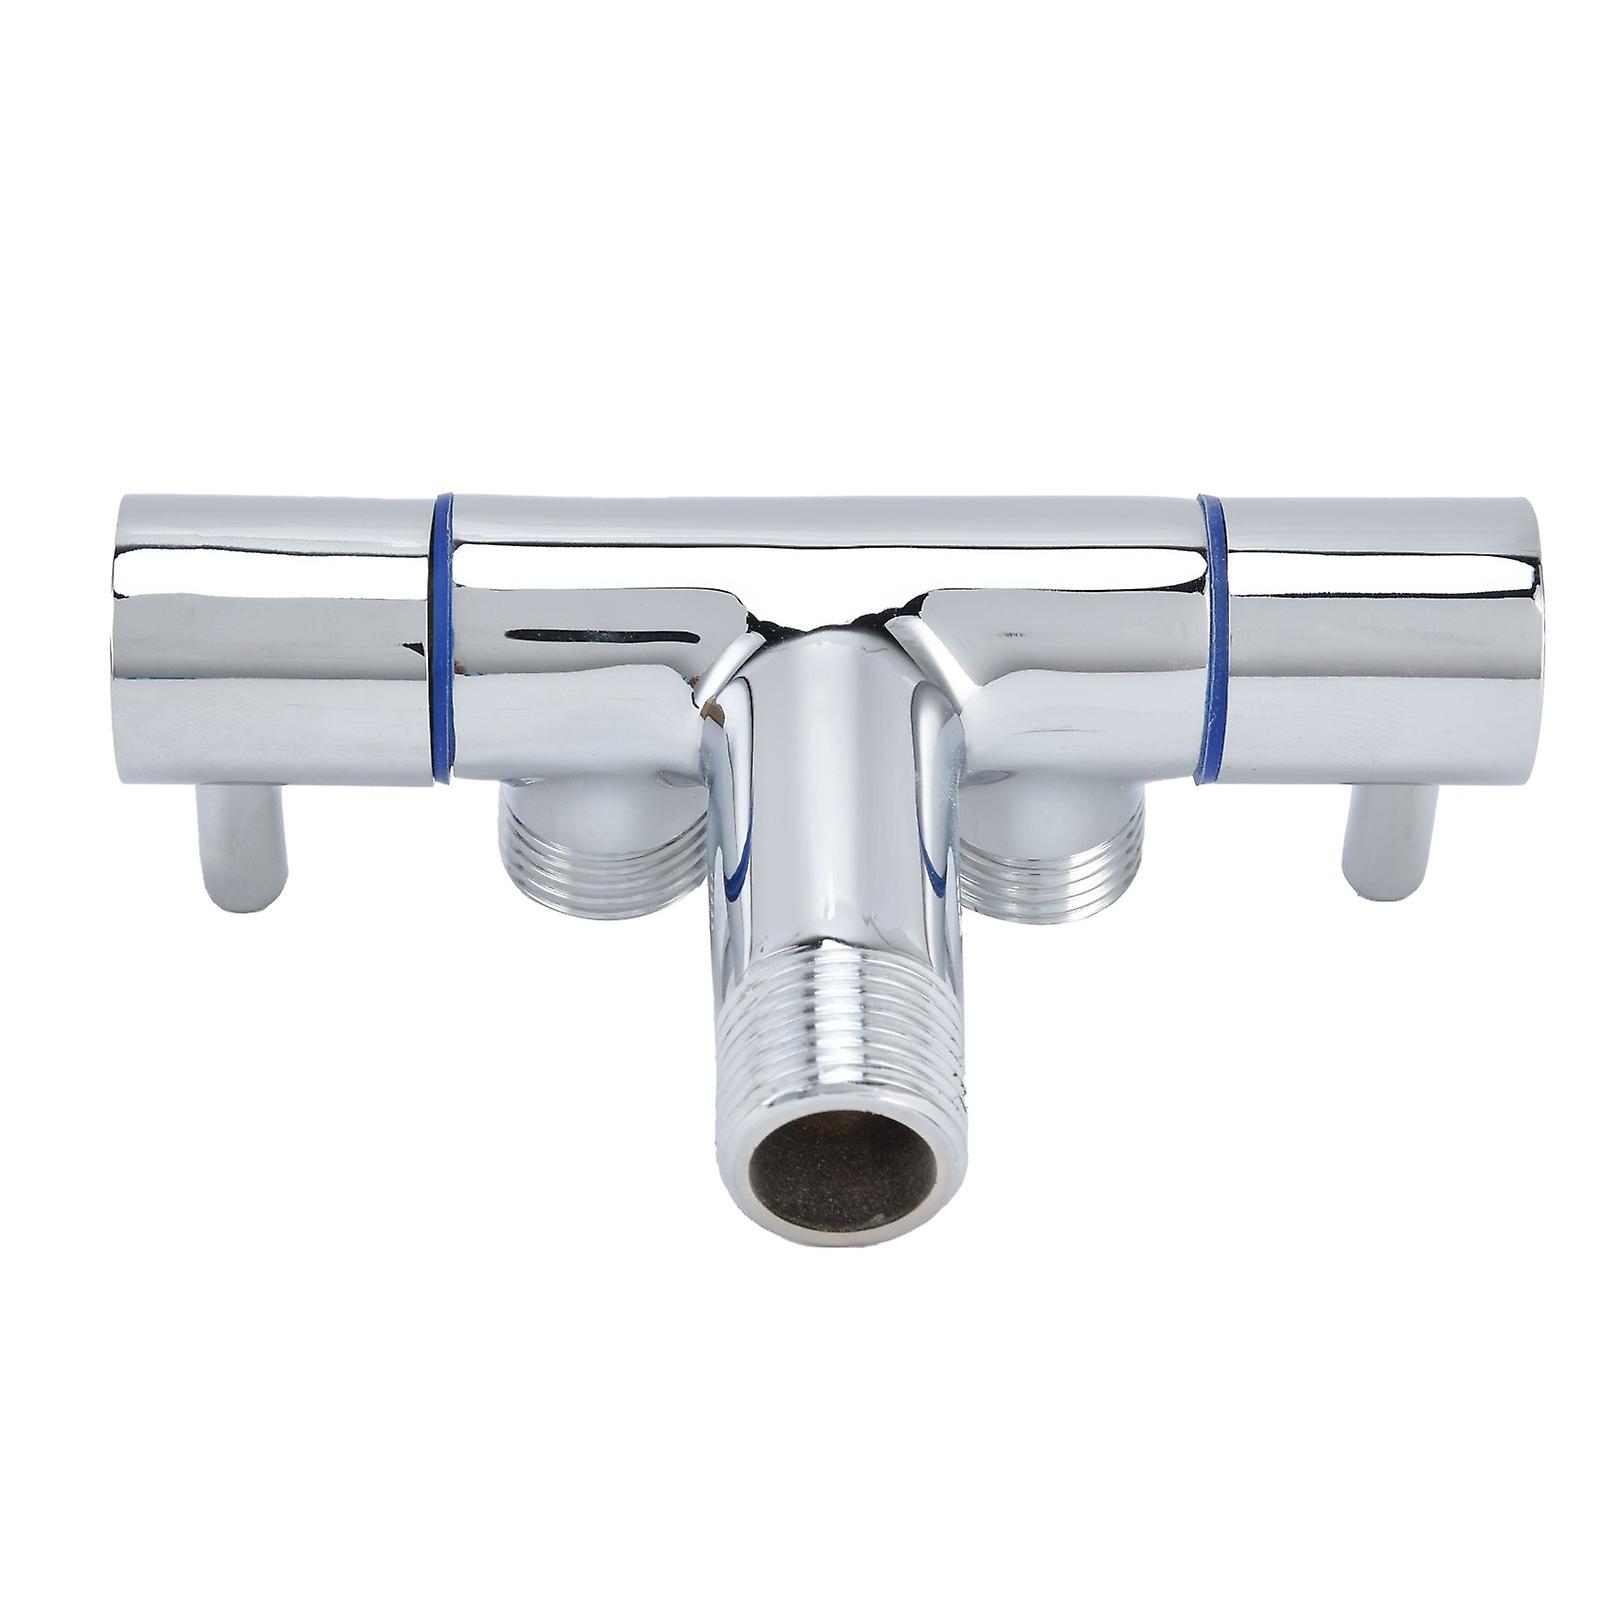 G1/2 Male Thread Angle Valve 1 Inlet 2 Outlet Cold Water Faucet Diverter Valve With 2 Handles